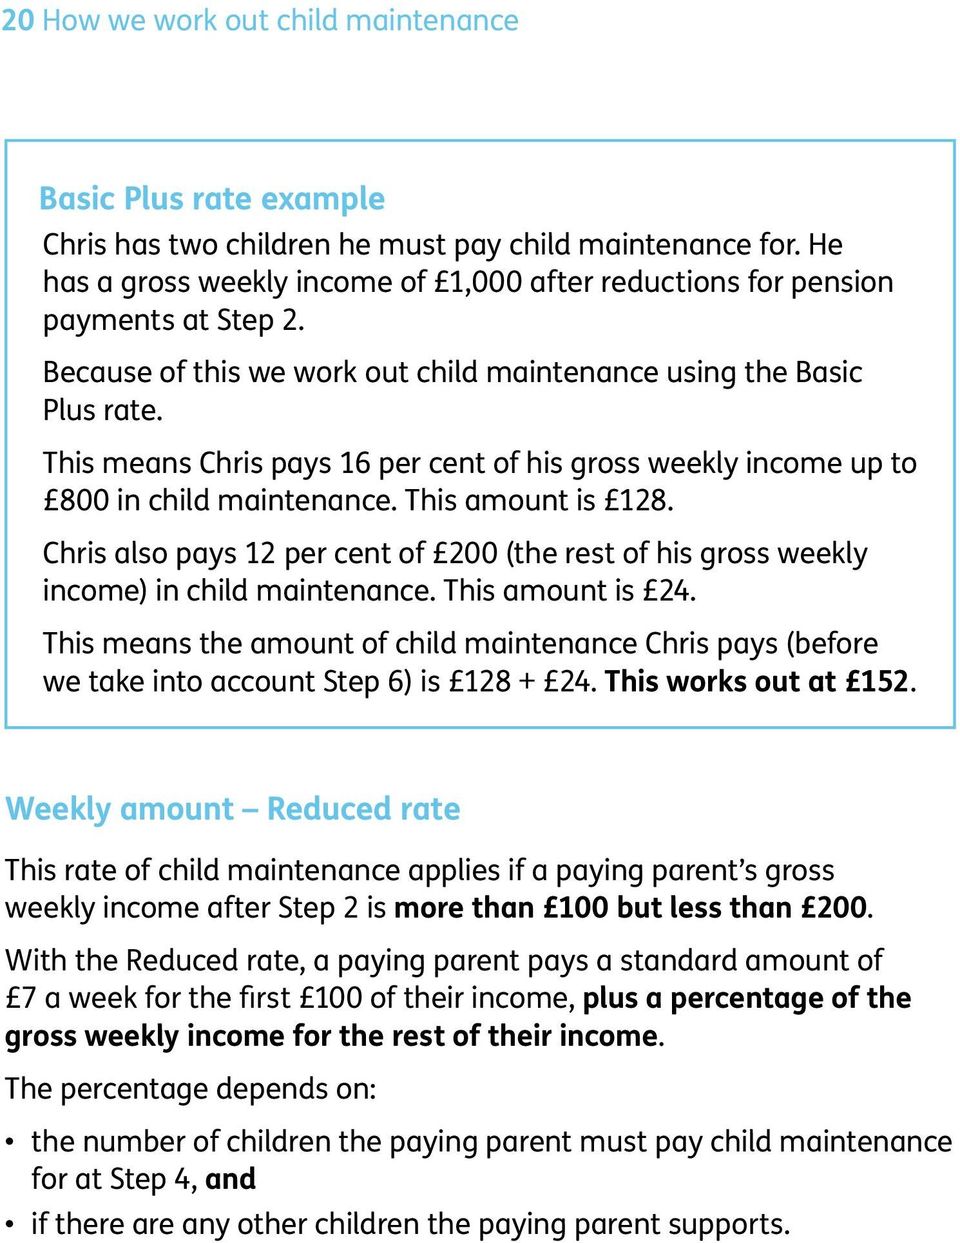 This means Chris pays 16 per cent of his gross weekly income up to 800 in child maintenance. This amount is 128.